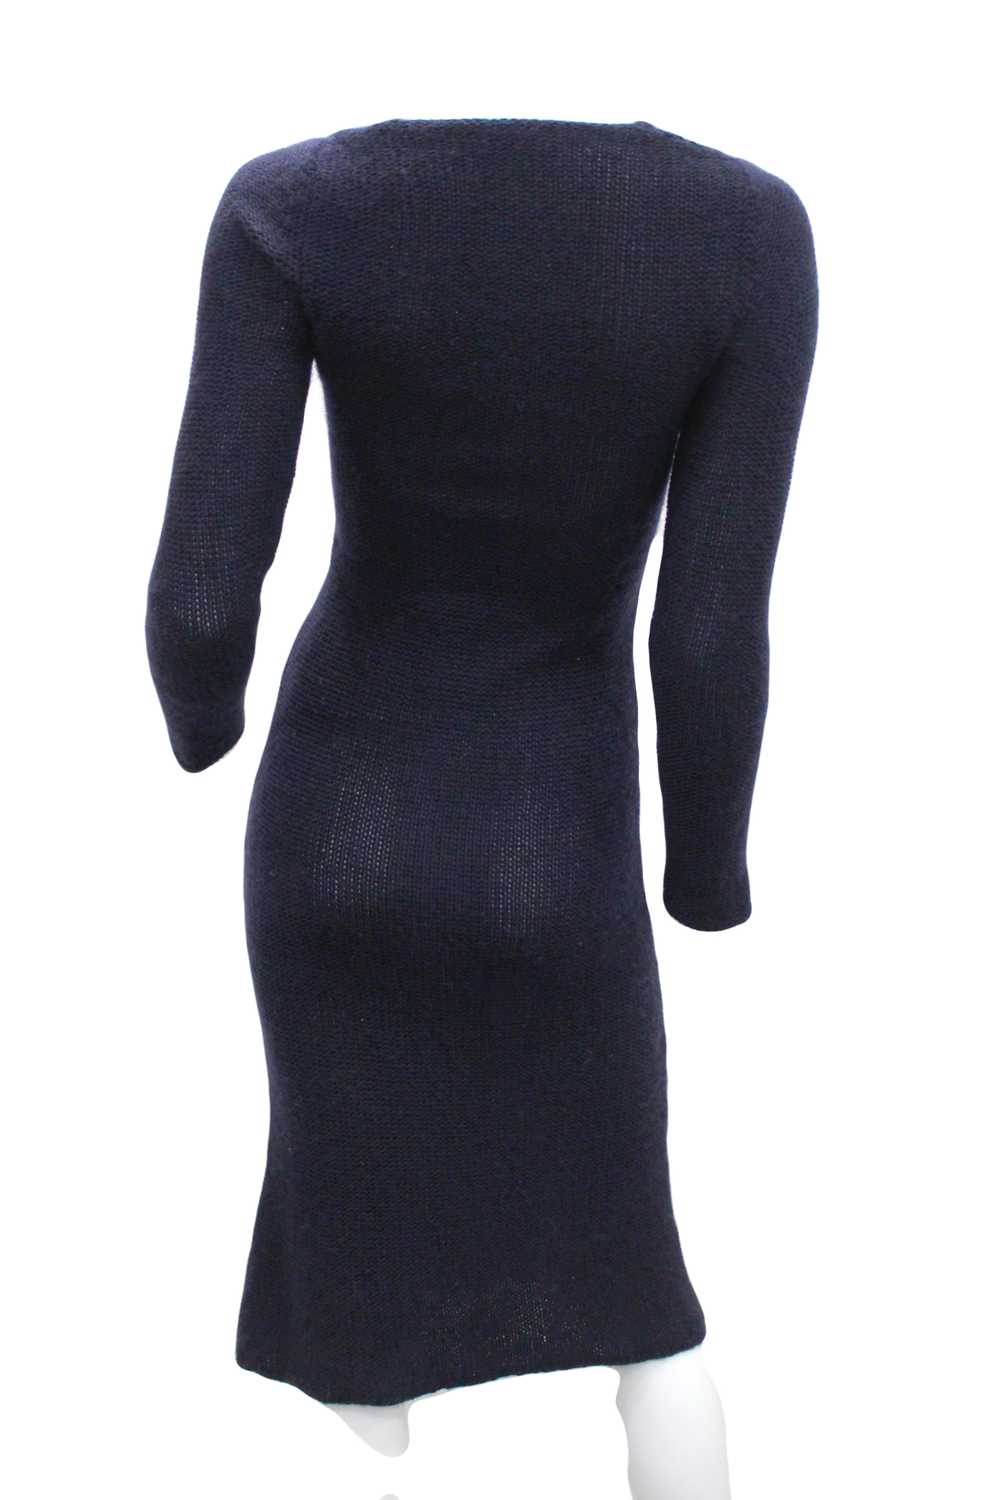 GUCCI F/W 1996 KNITTED NAVY DRESS - image 3